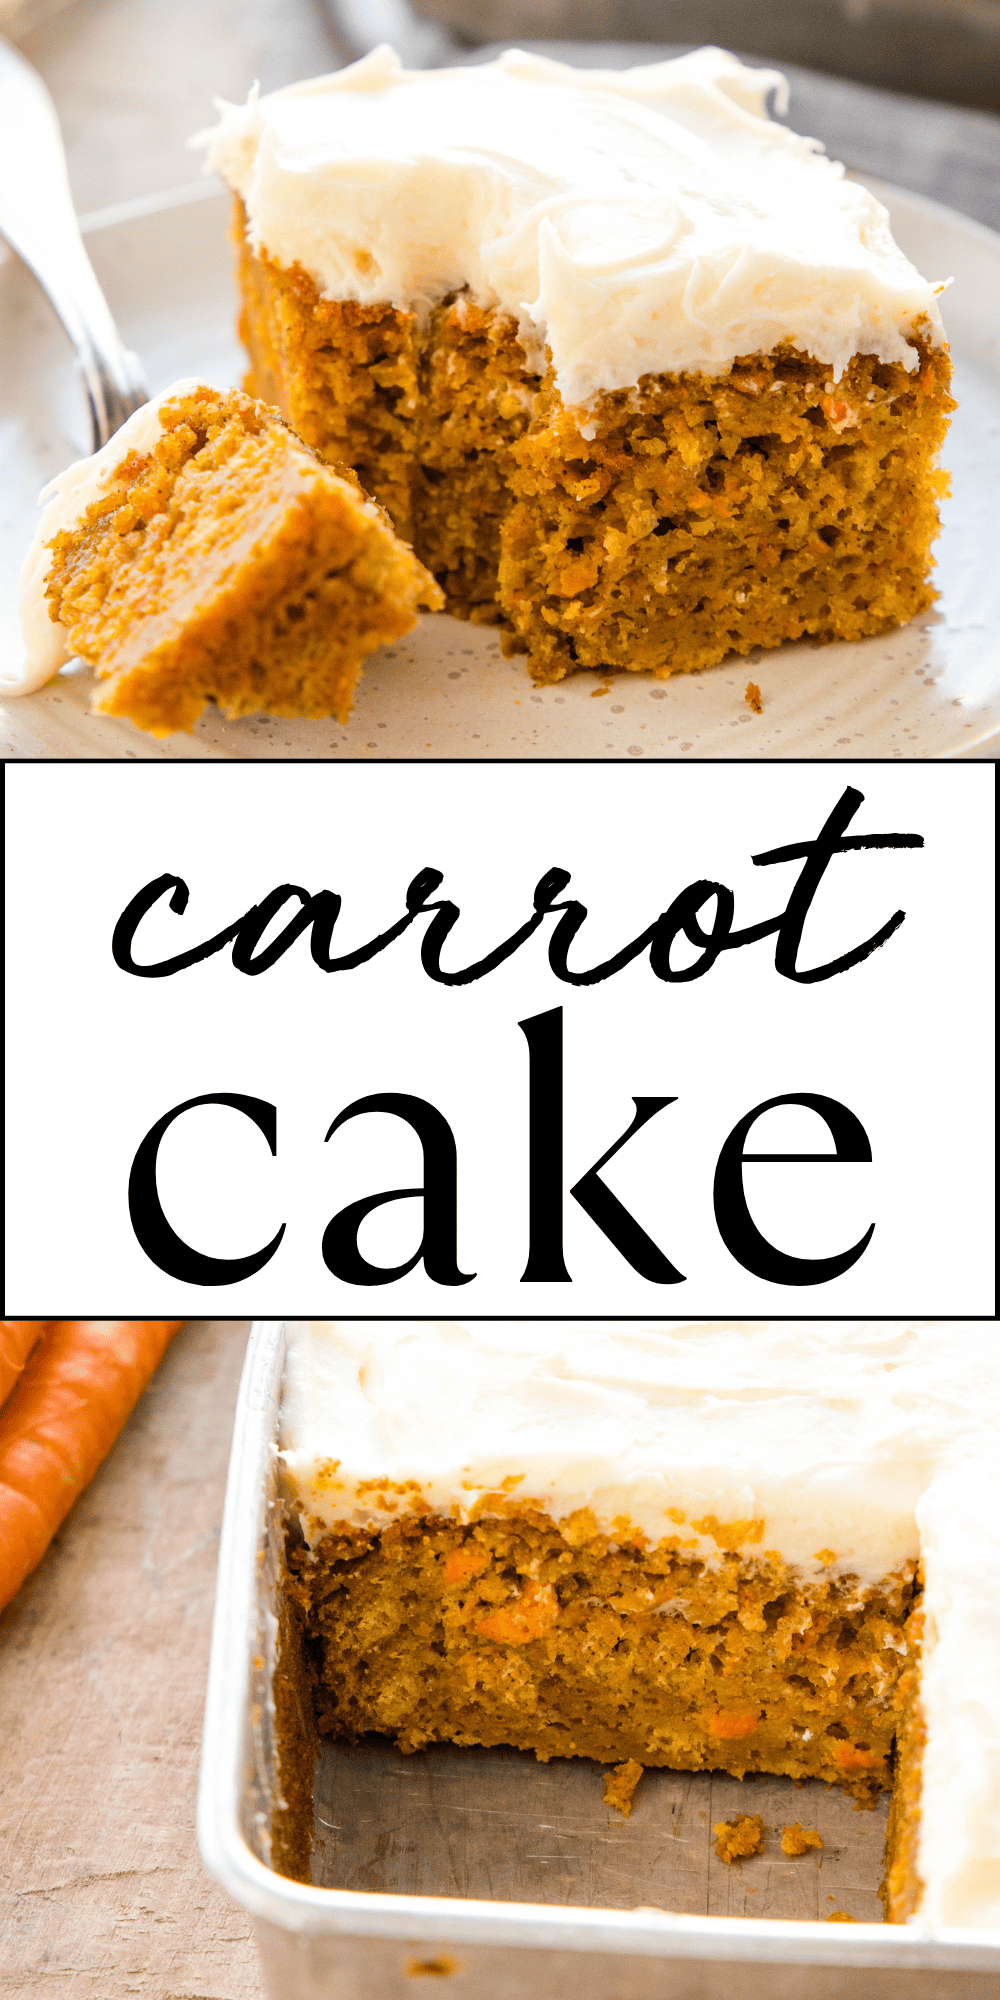 This Easy Carrot Cake recipe is the perfect classic carrot cake that's simple to make in one bowl. The best carrot cake recipe for beginners with fluffy cream cheese frosting! Recipe from thebusybaker.ca! #carrotcake #bestcarrotcakerecipe #carrotcakerecipe #easycarrotcake #easterdessert via @busybakerblog